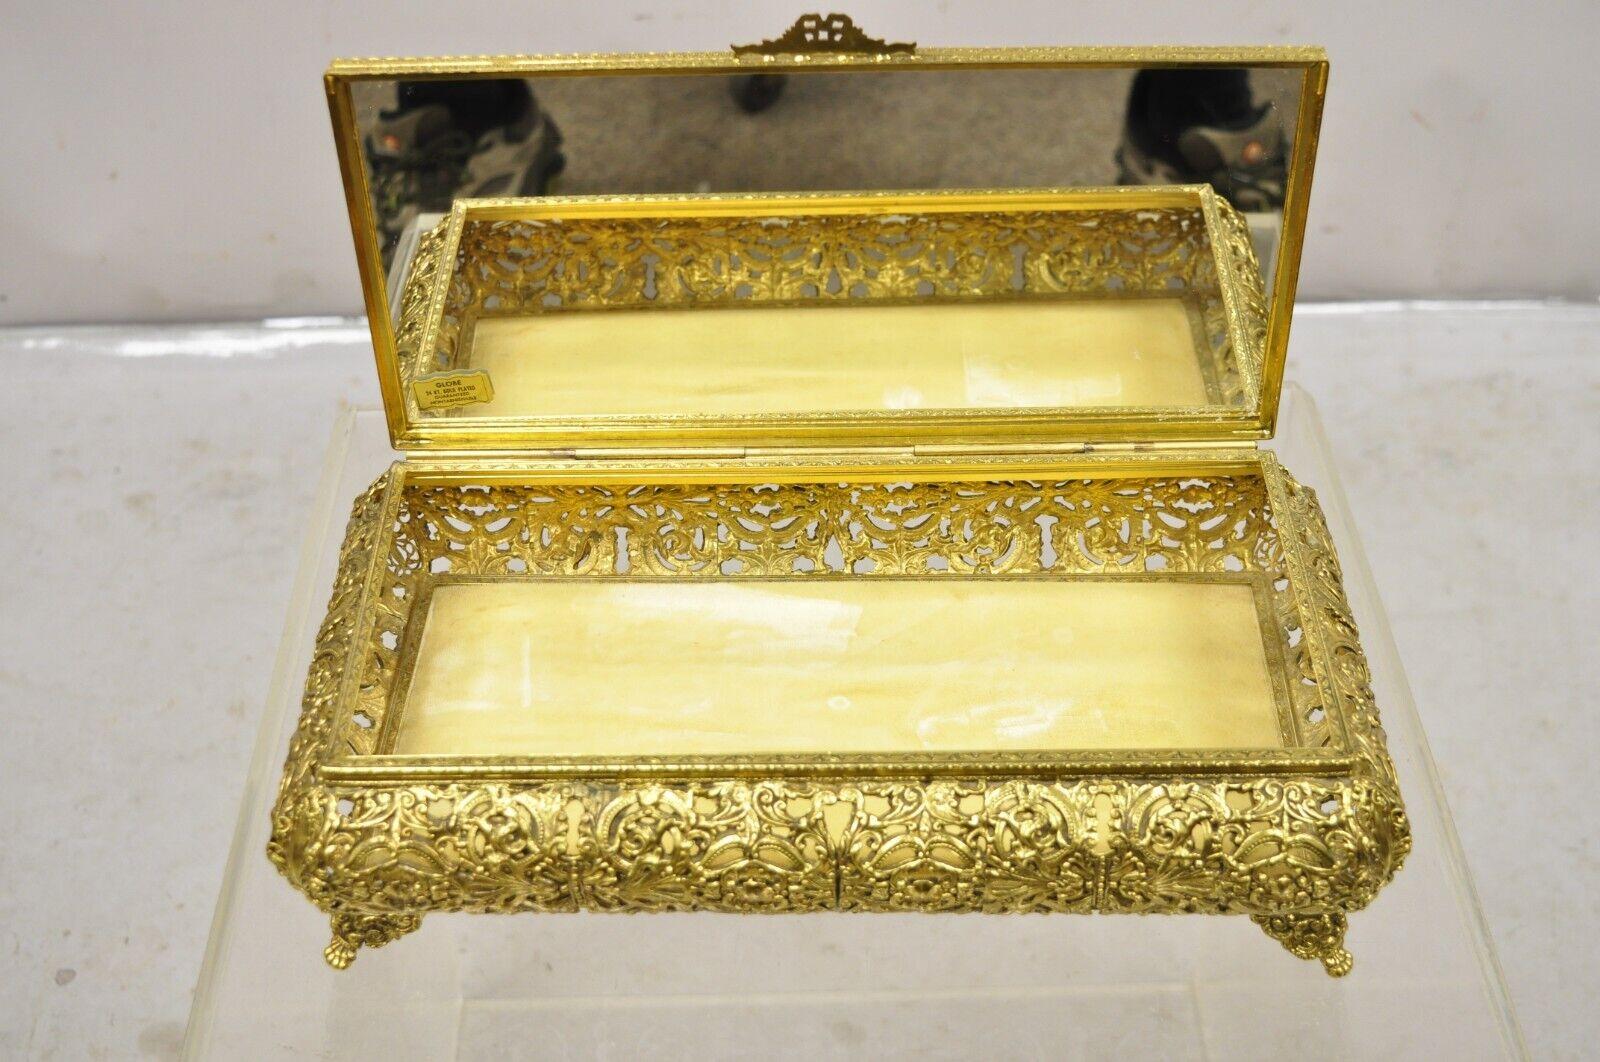 Vtg French Hollywood Regency Style Gold Filigree Vanity Jewelry Box by Globe For Sale 2